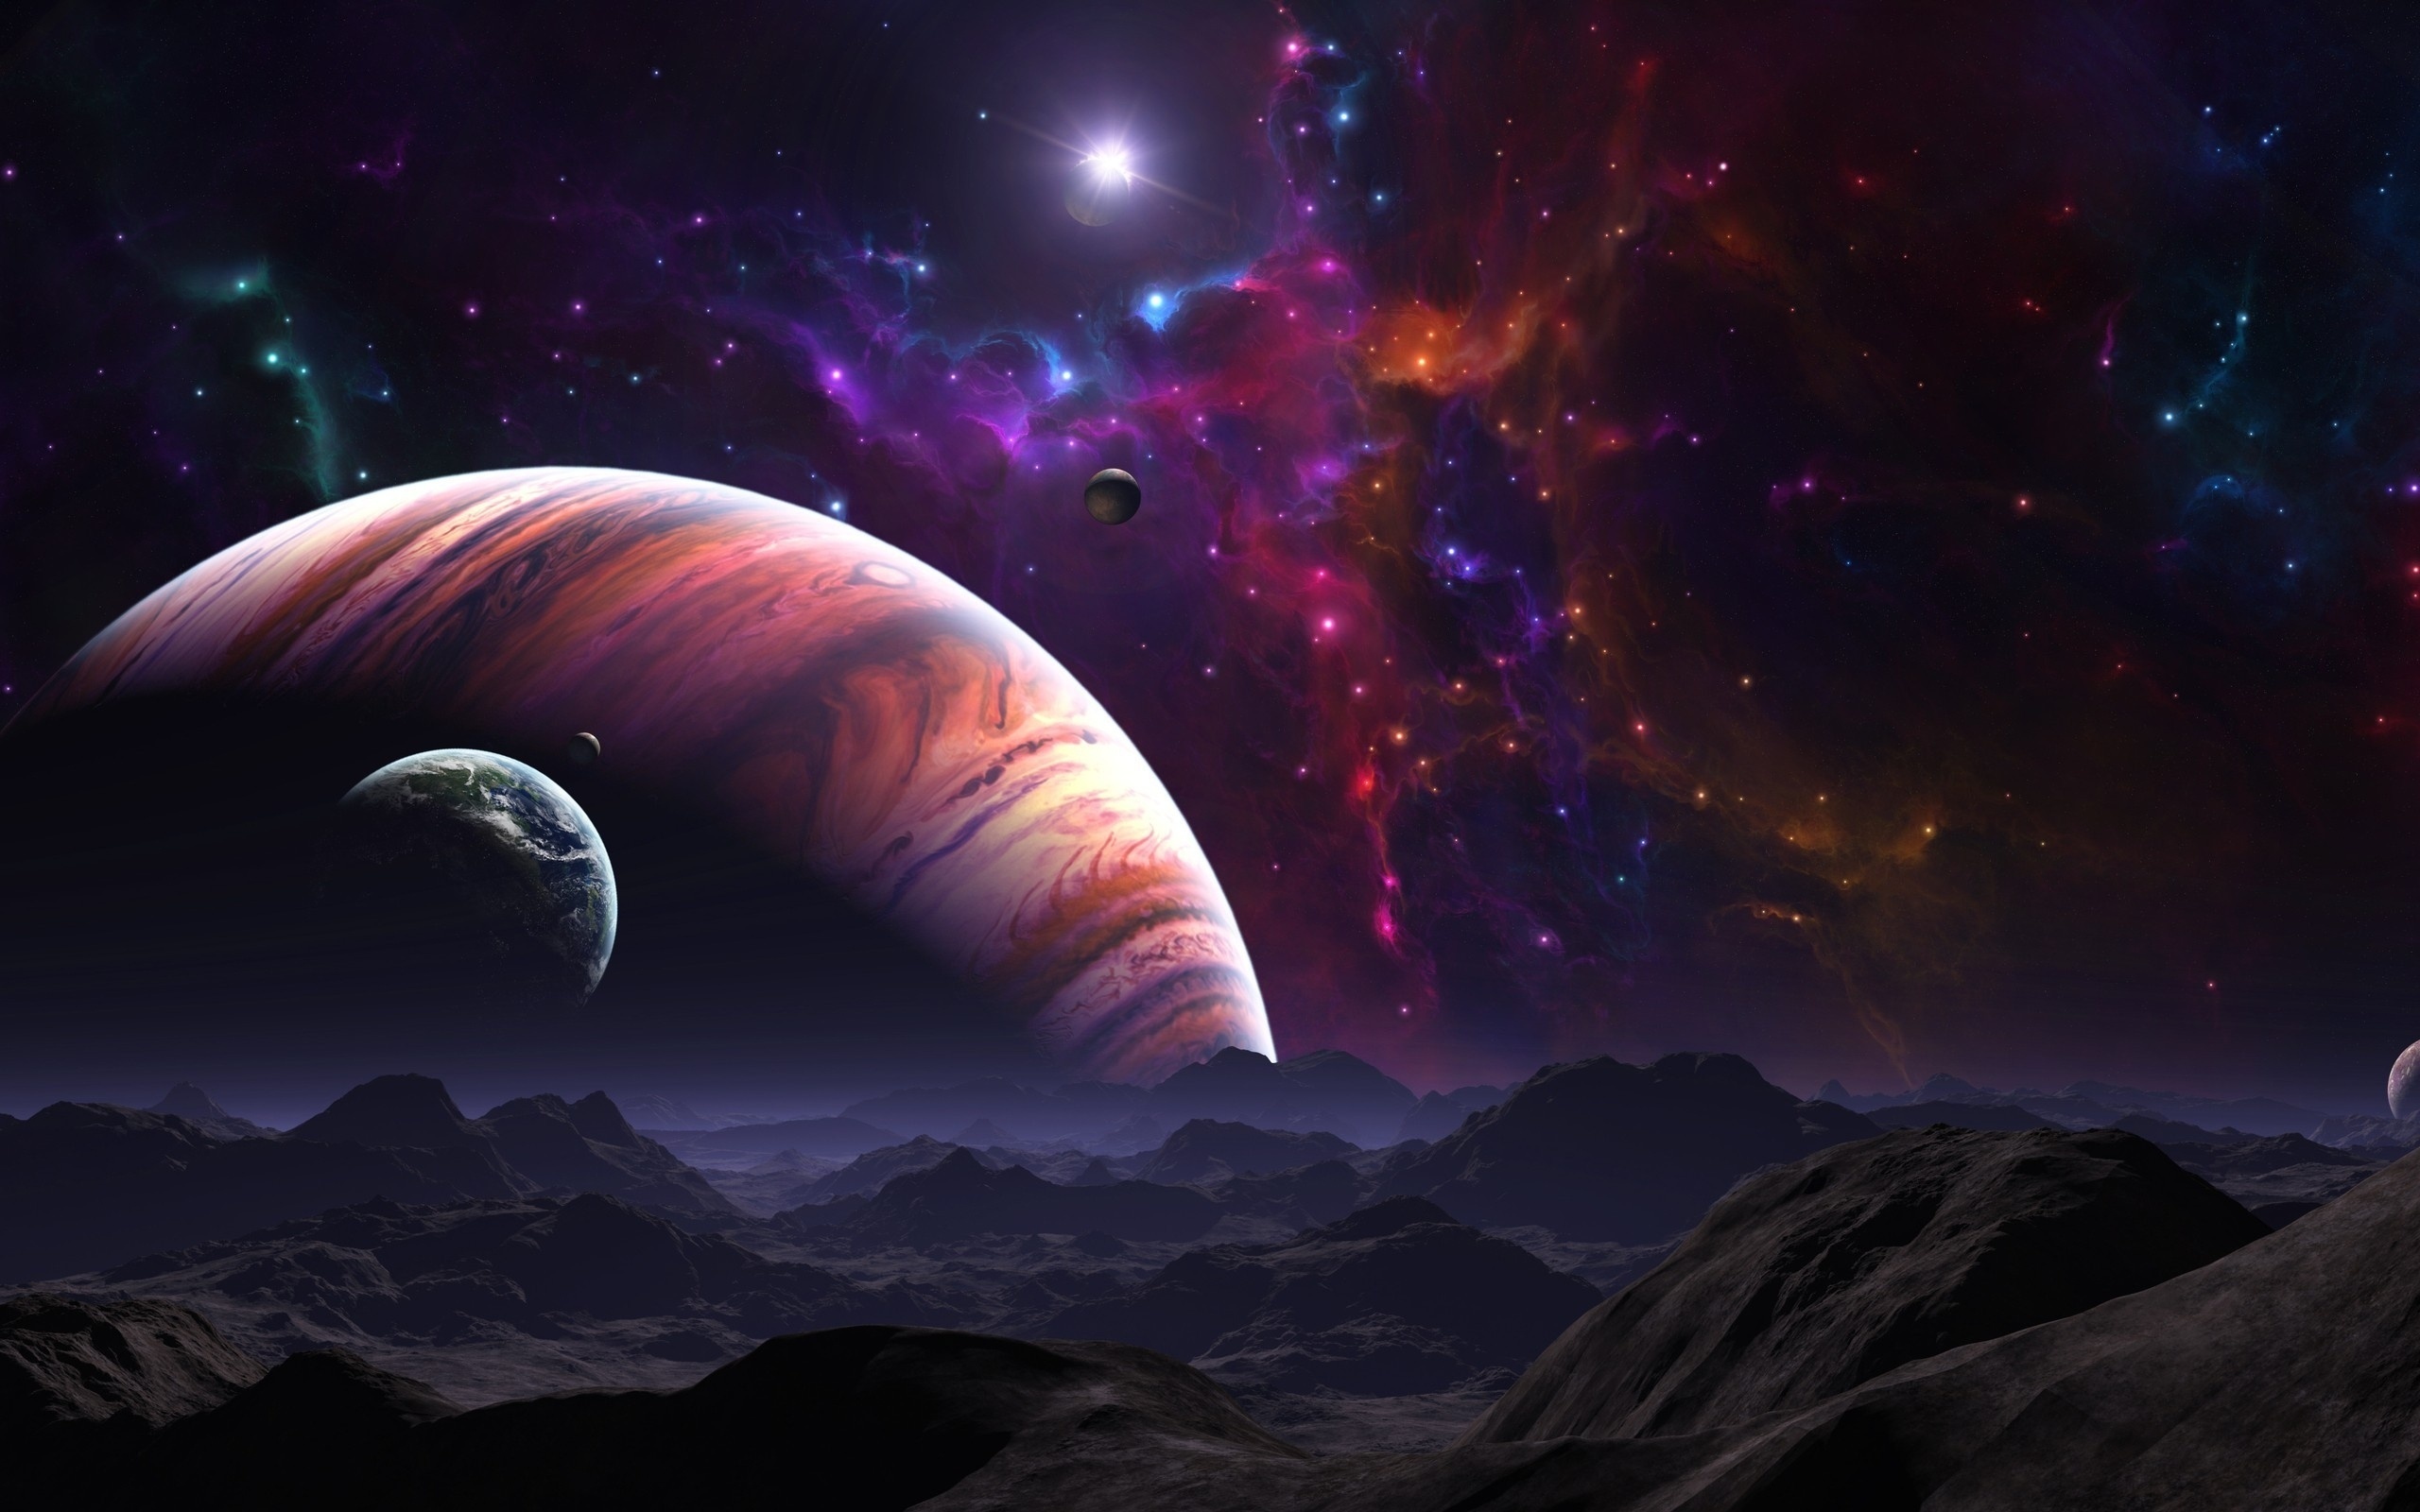 Download 2560x1600 Wallpaper Galaxy Space Fantasy Planets Cosmos Art Dual Wide Widescreen 16 10 Widescreen 2560x1600 Hd Image Background